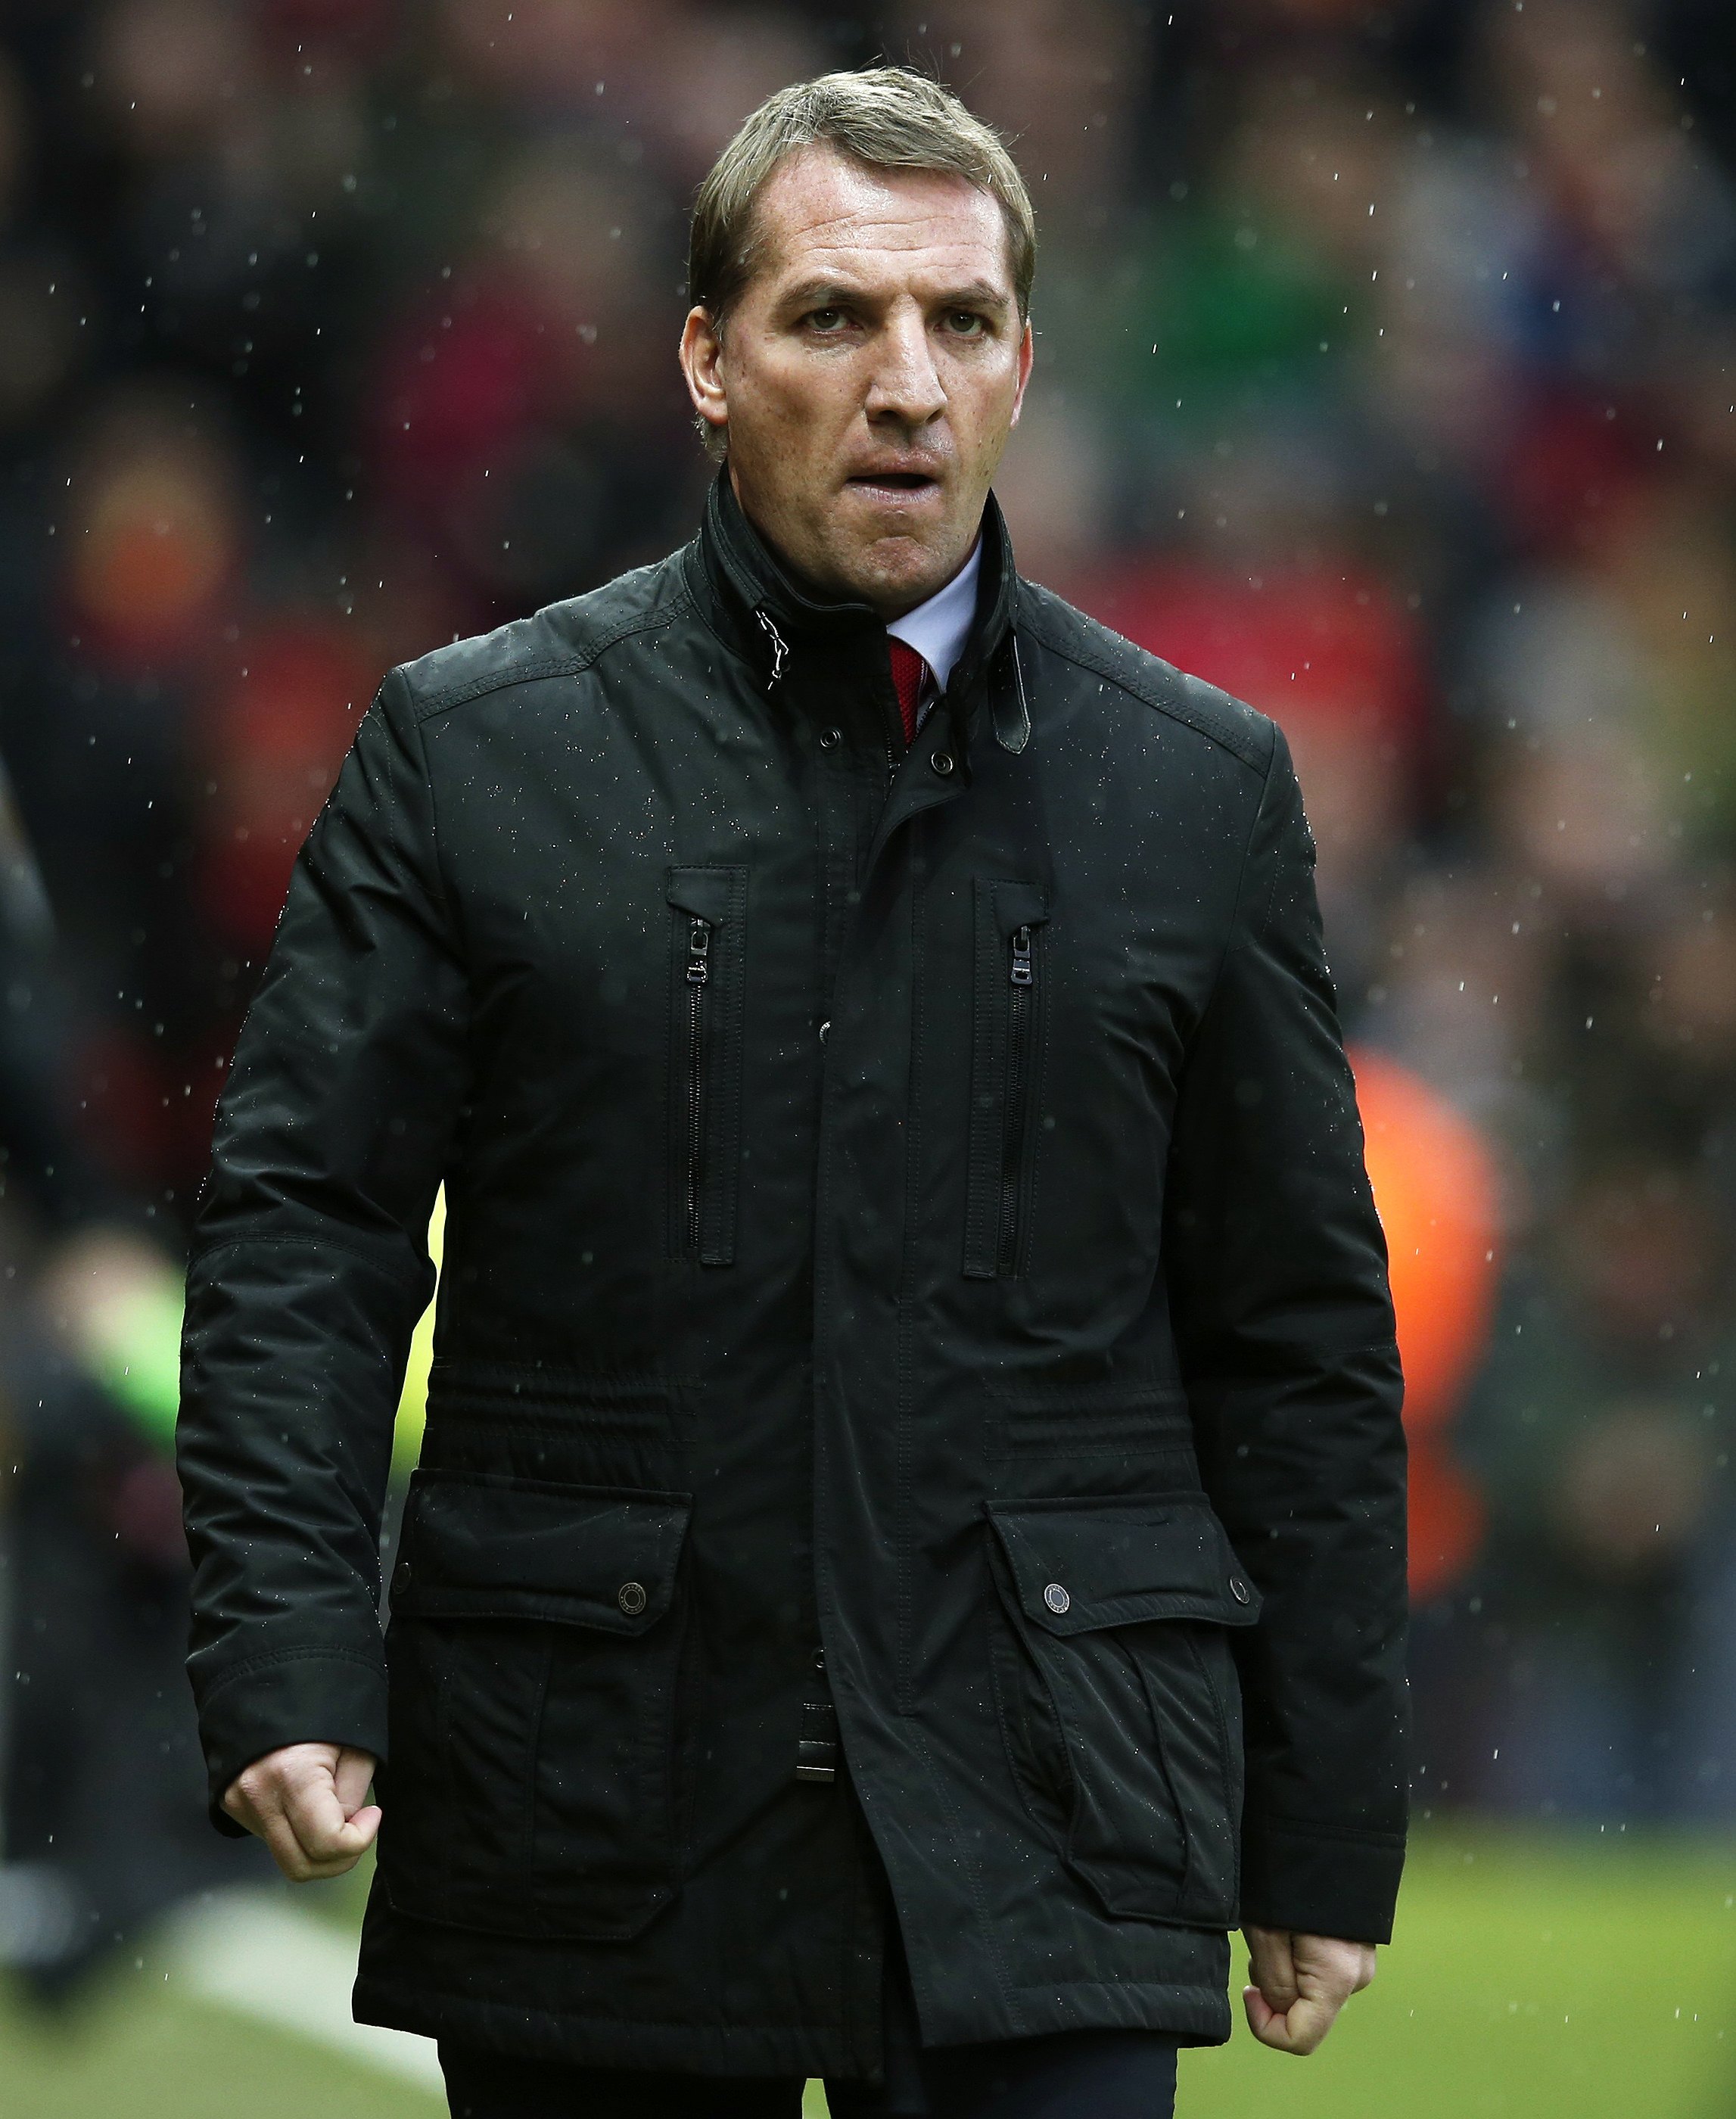 Liverpool manager Brendan Rodgers takes his seat before their English Premier League soccer match against Manchester United at Old Trafford in Manchester